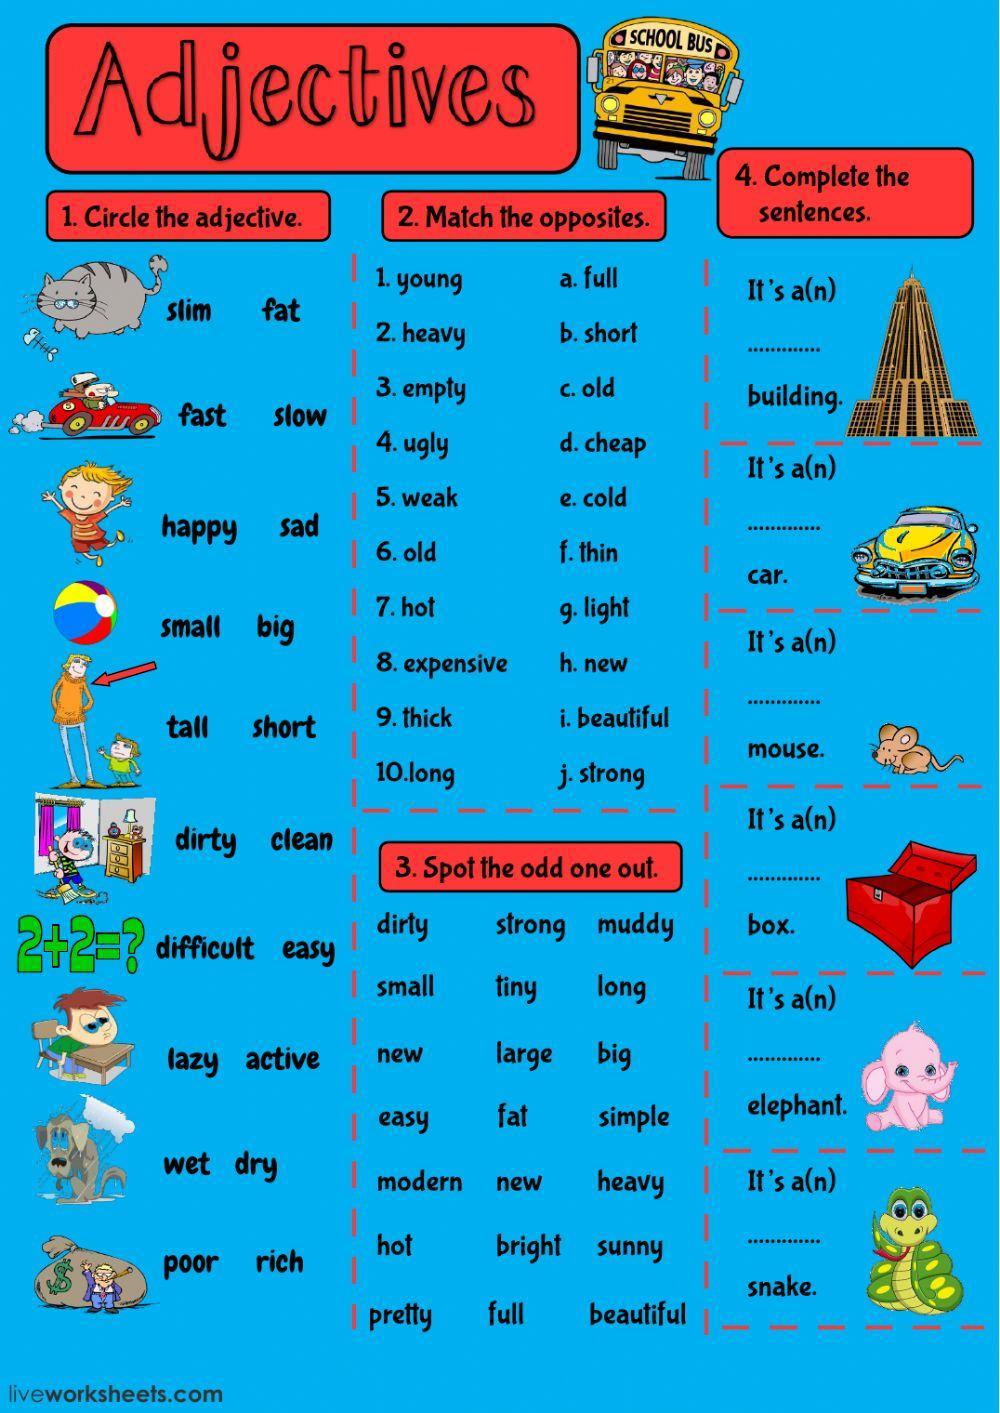 Adjective в английском. Adjectives in English for Kids. Adjectives Worksheets. Английский Elementary. Adjectives activities